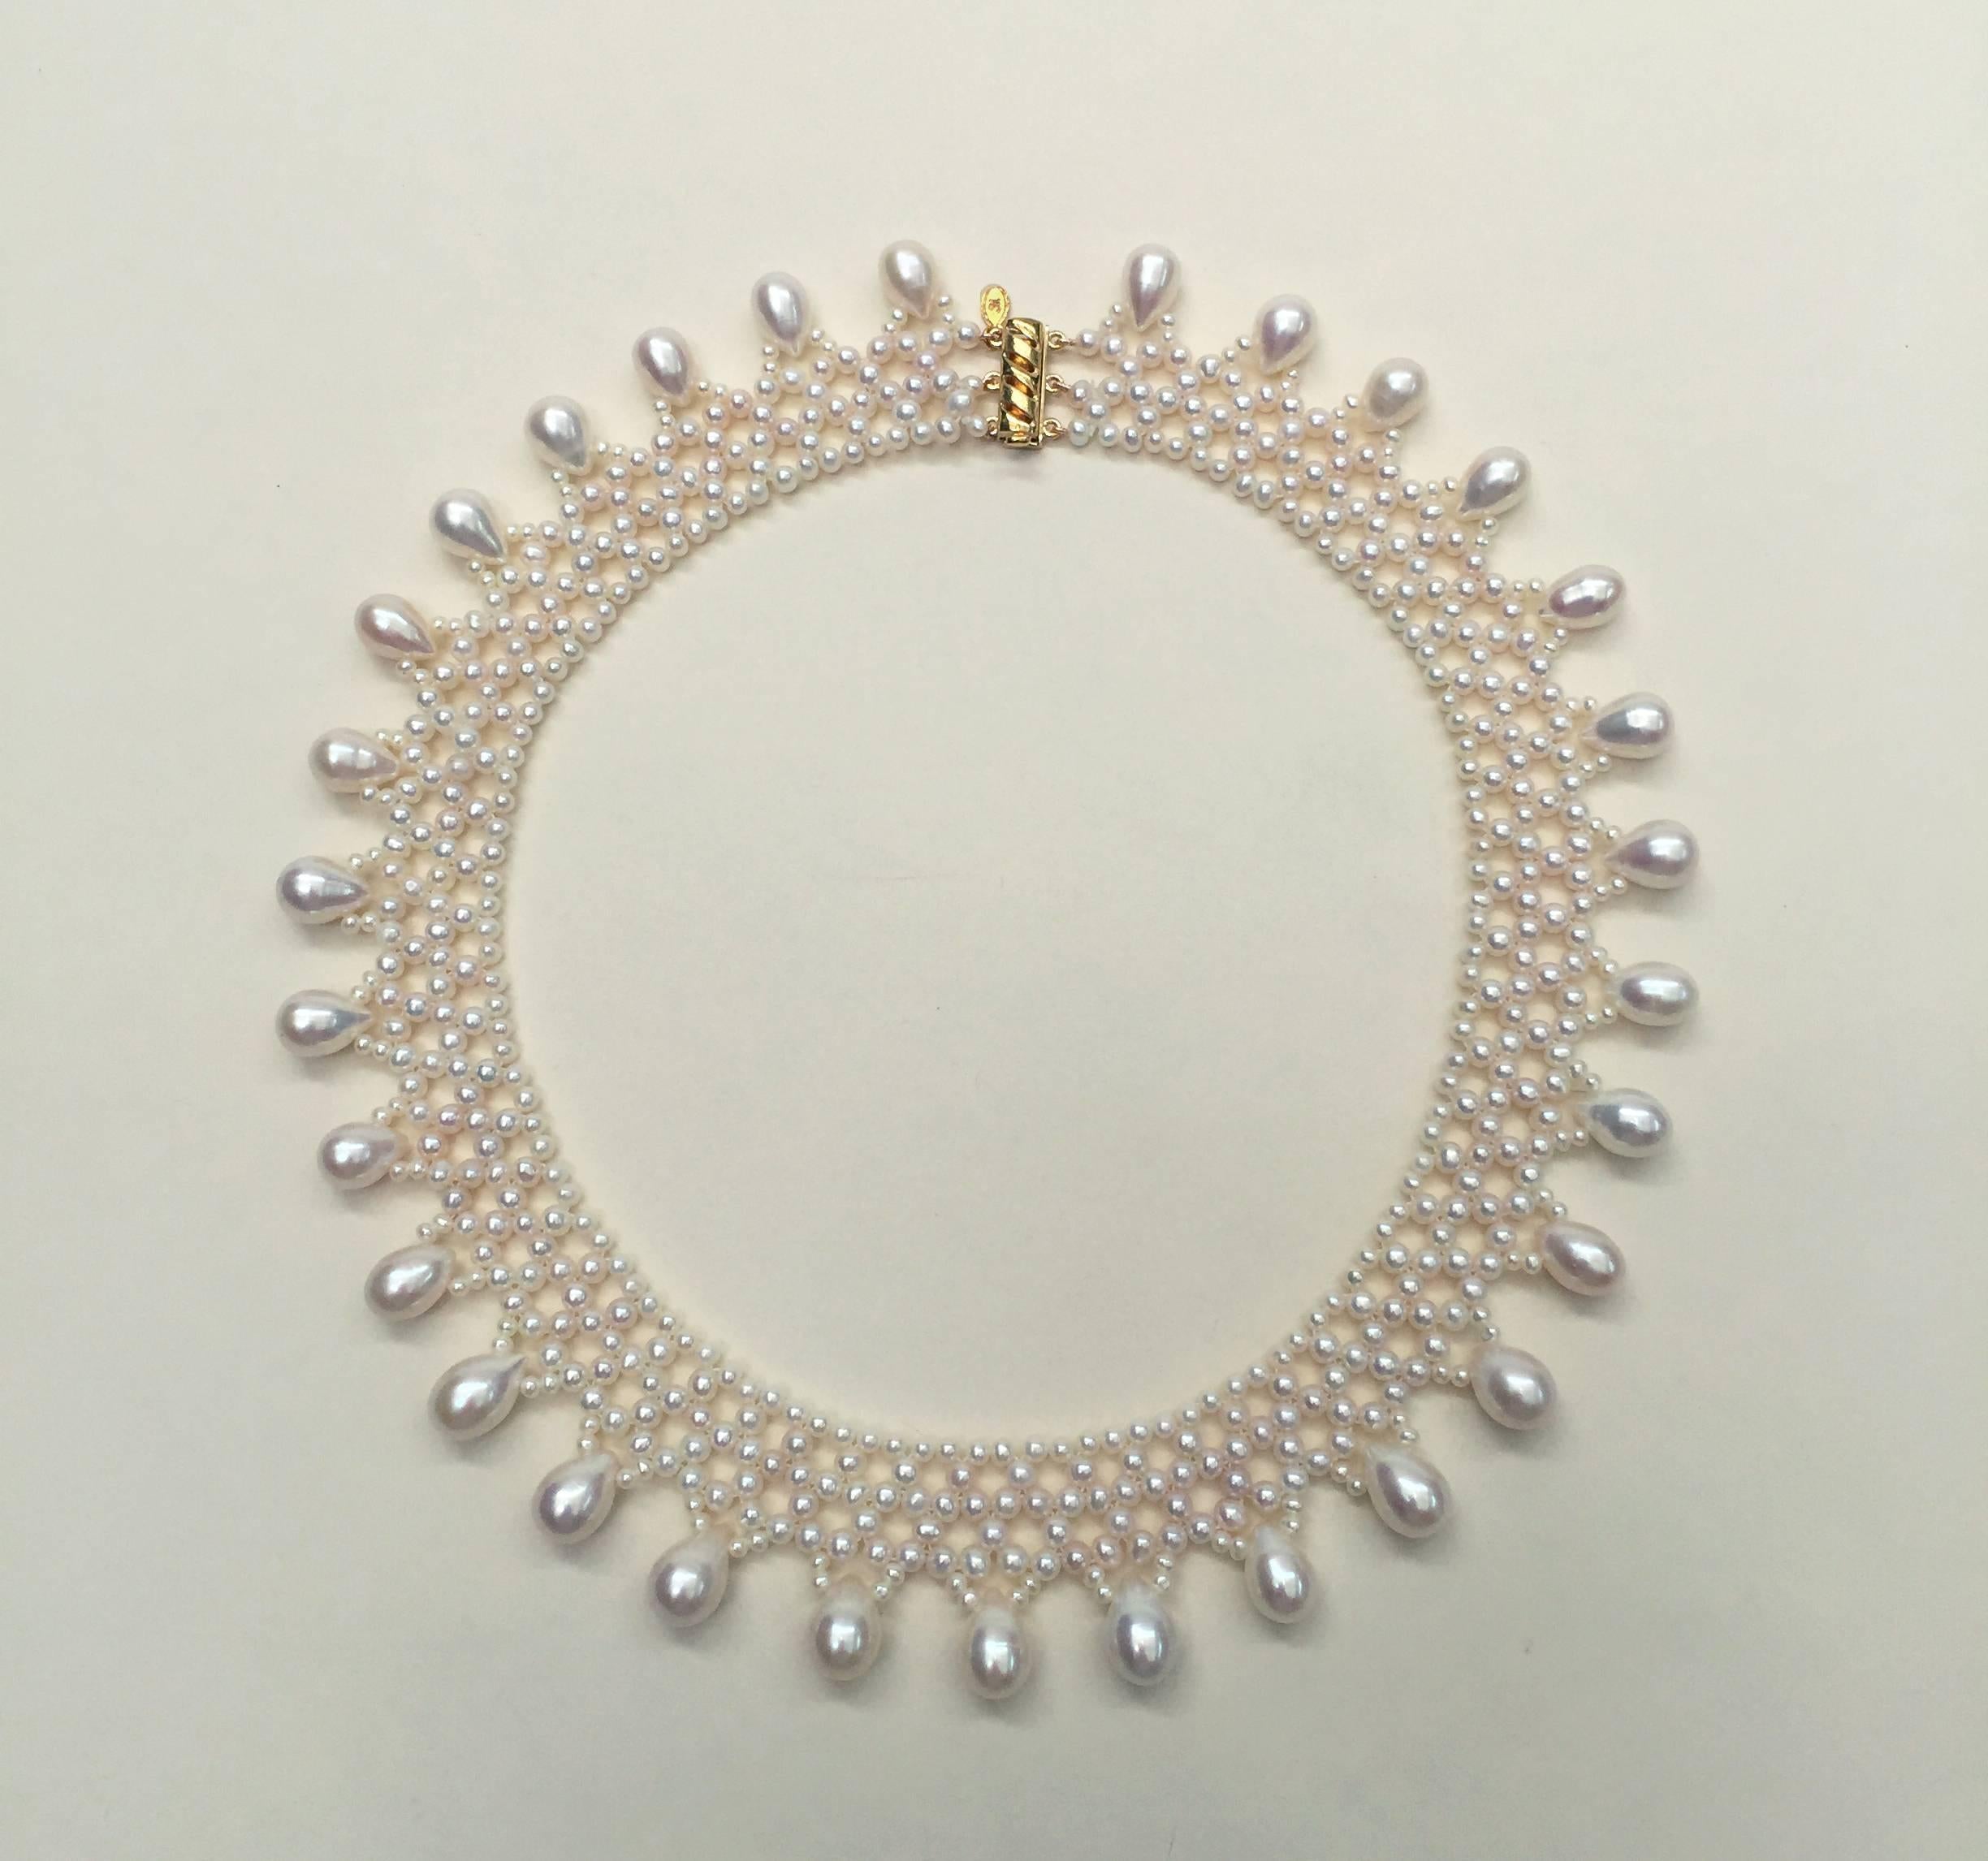   Marina J  Woven Pearl Necklace with Pear-Shaped Pearl Drops and sliding clasp 1